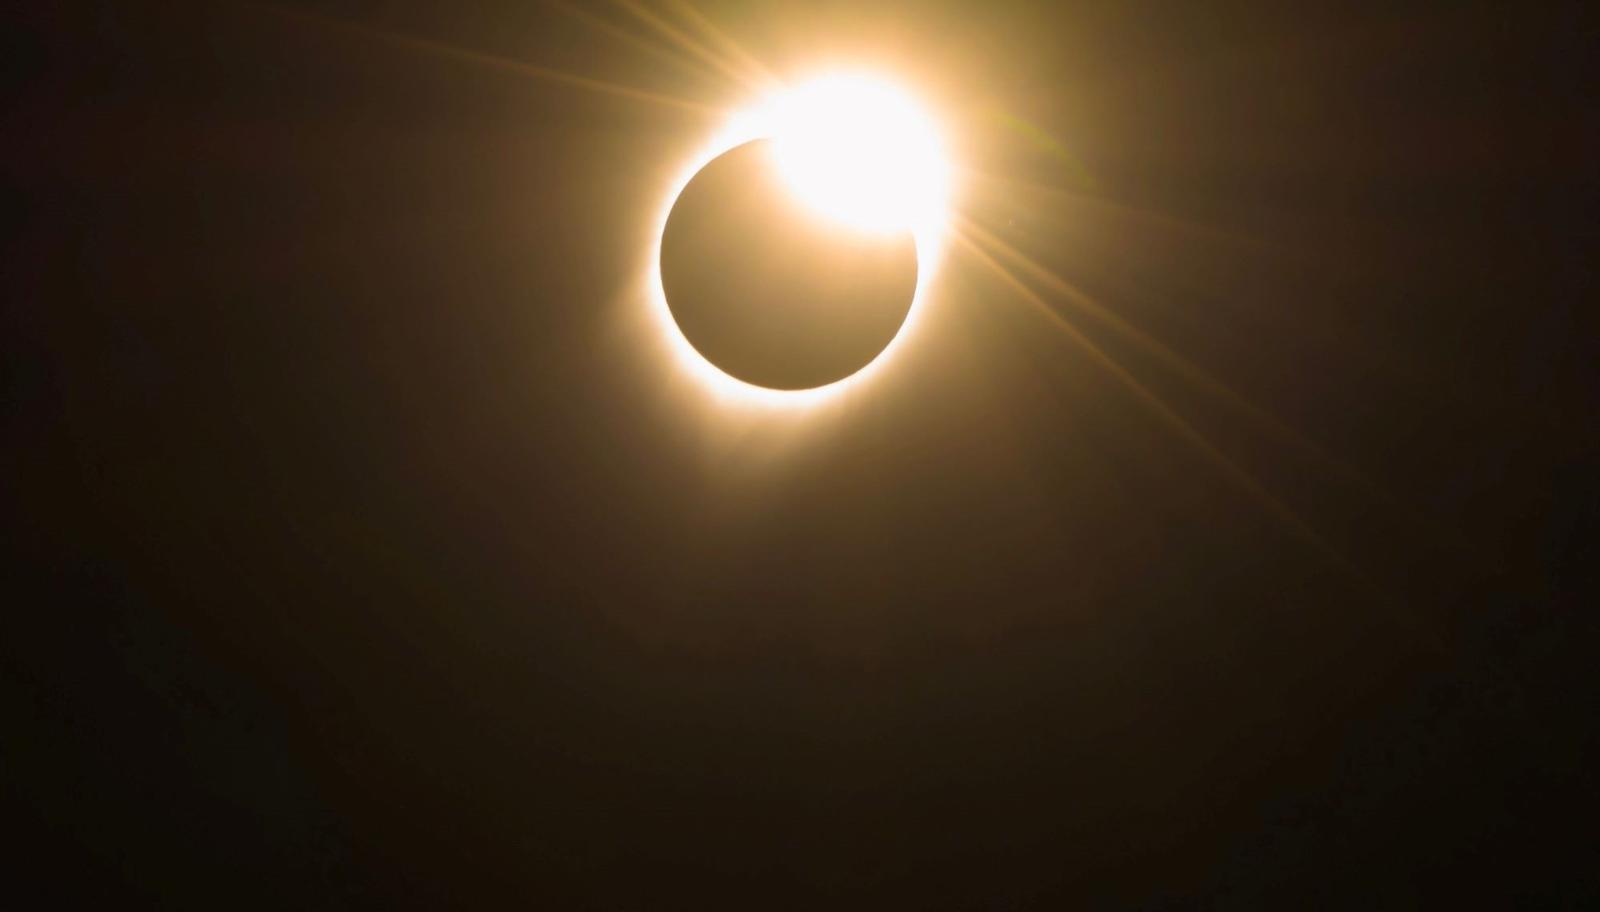 image of a solar eclipse